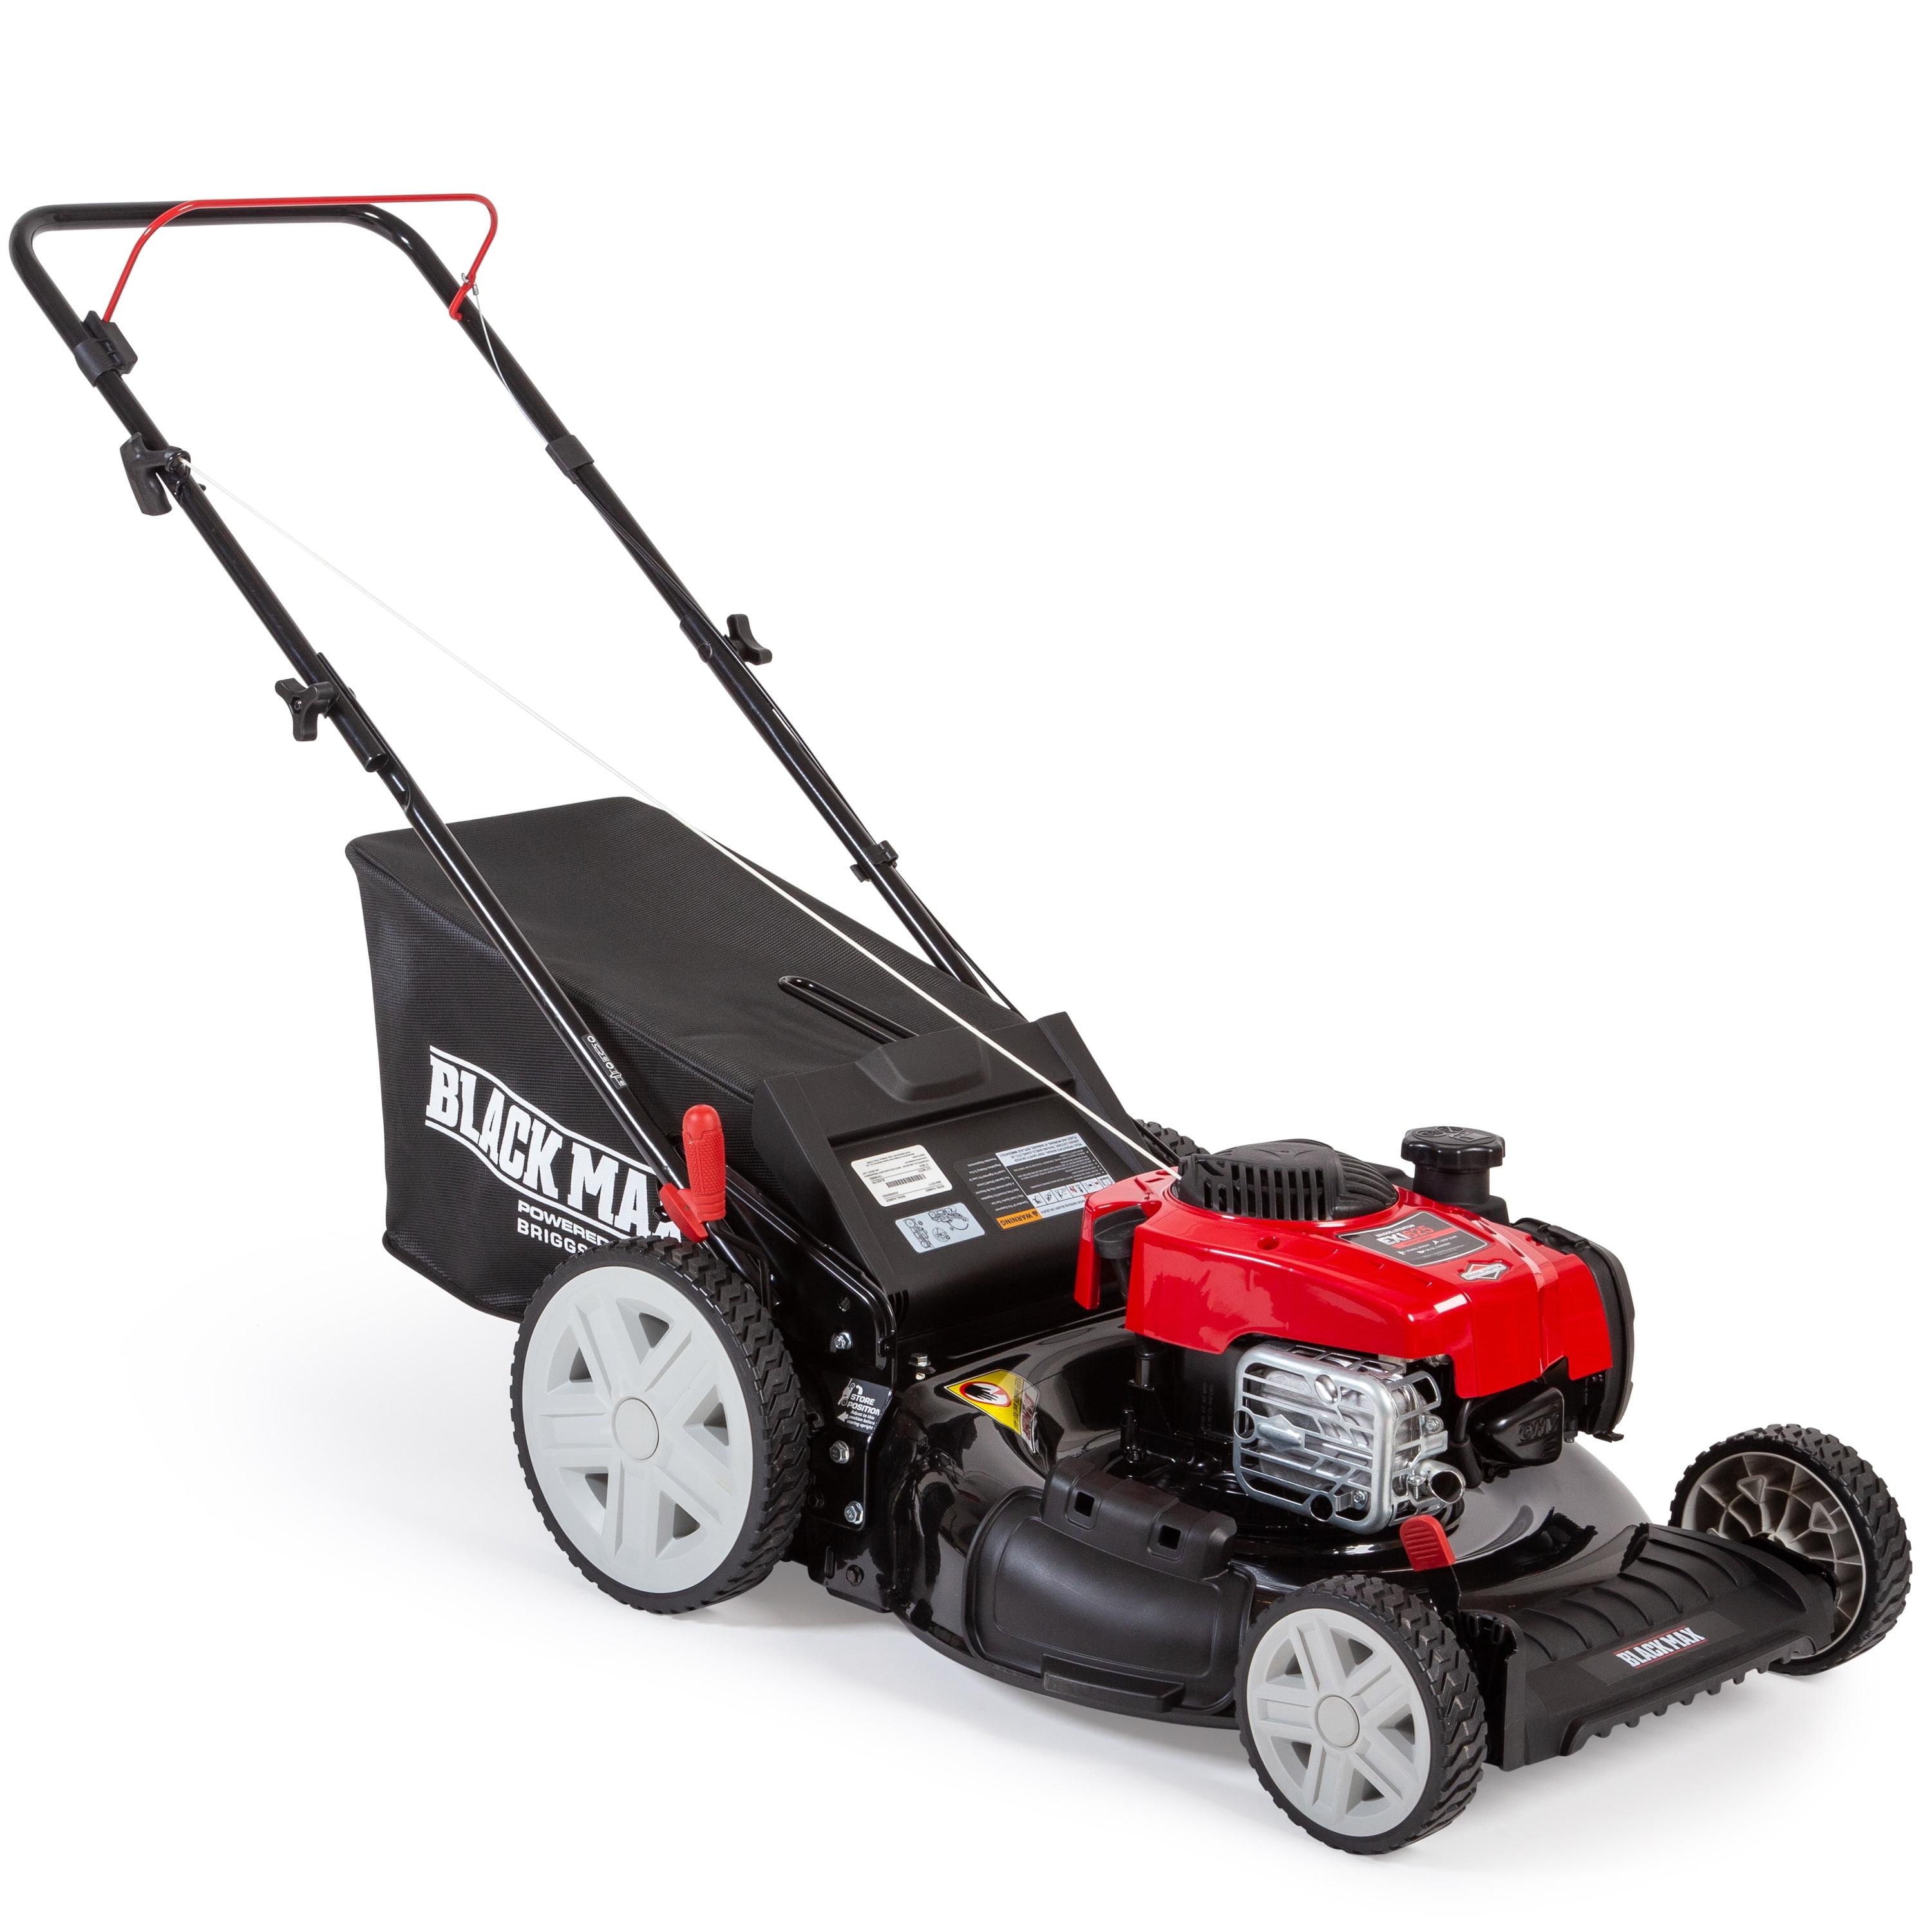 Black Max 21-inch 150cc Gas Push Mower with Mow-N-Stow (Assembled Weight  57.8 pounds Height 39.6) 